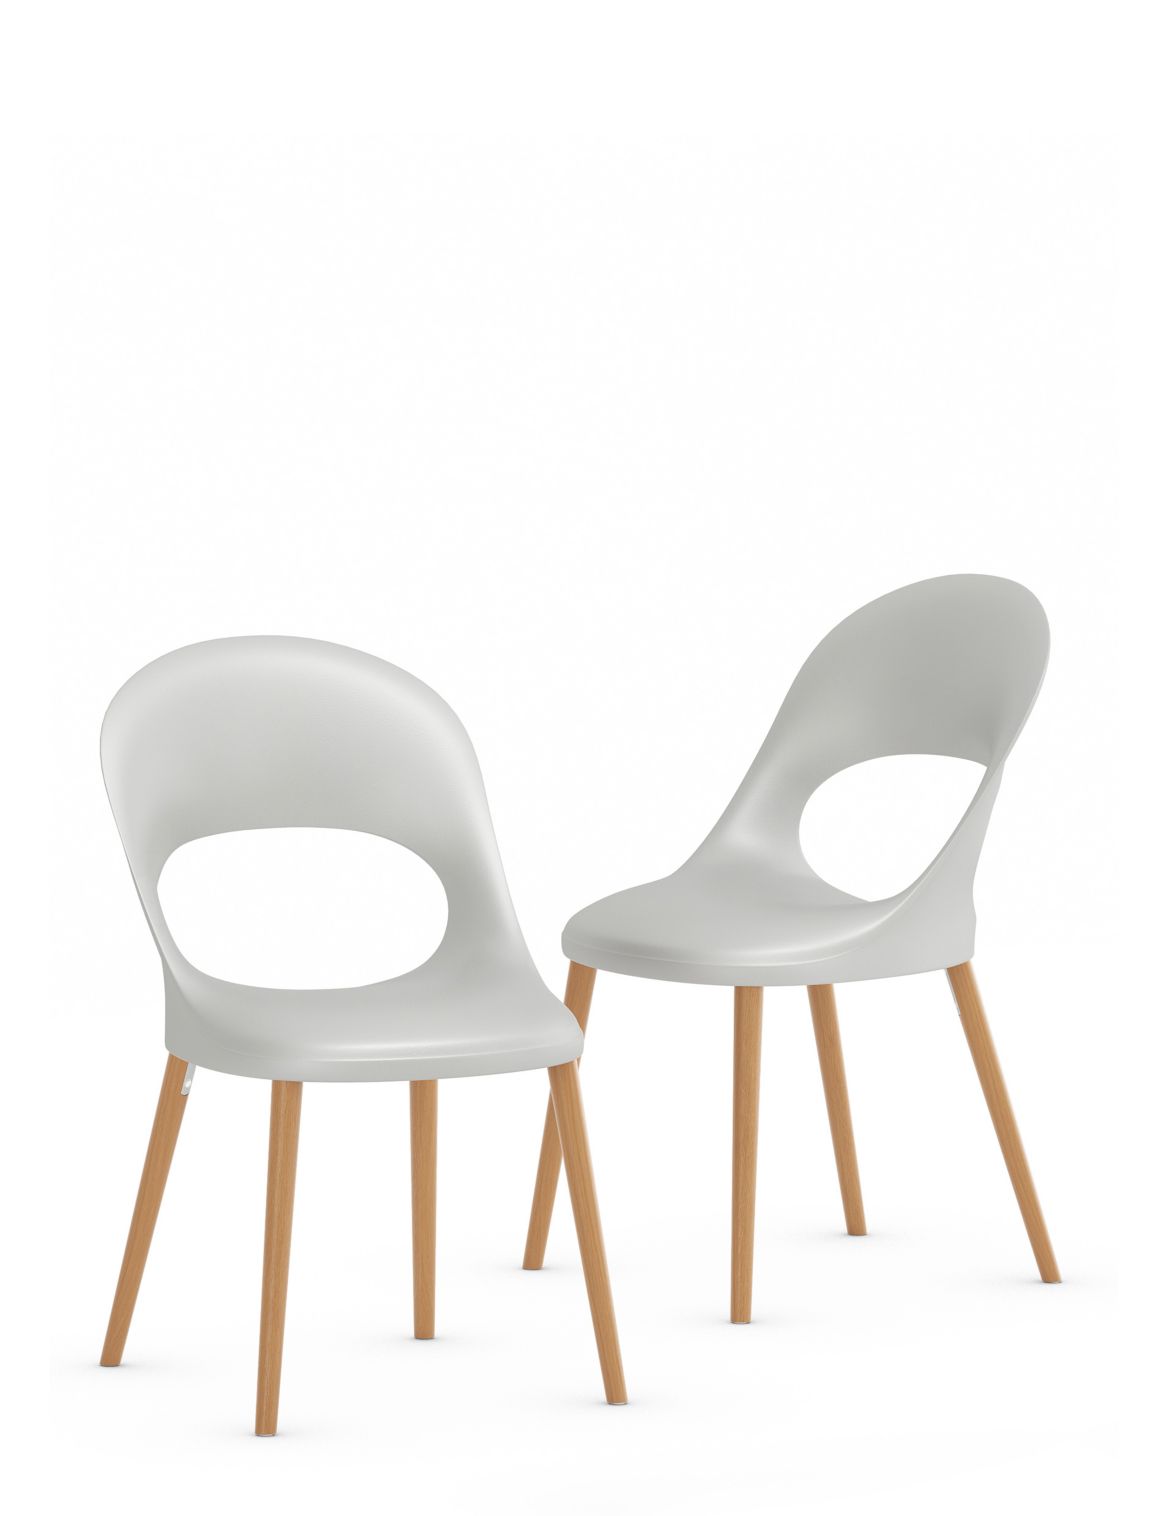 Set of 2 Curved Back Dining Chairs grey